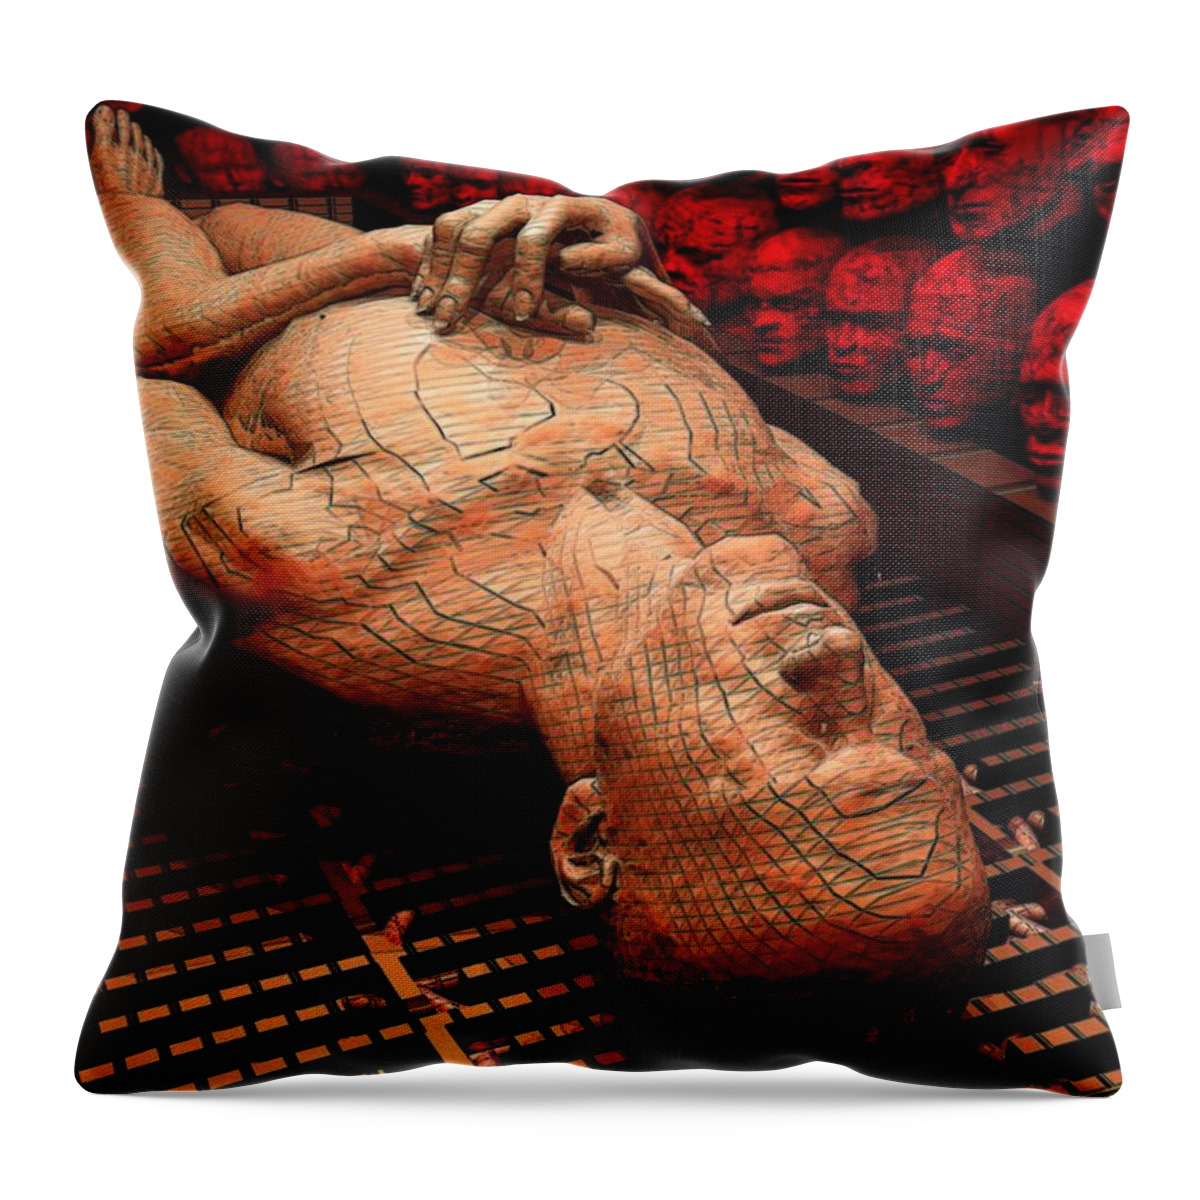 Arrival Throw Pillow featuring the digital art Arrival of The Damned by John Alexander